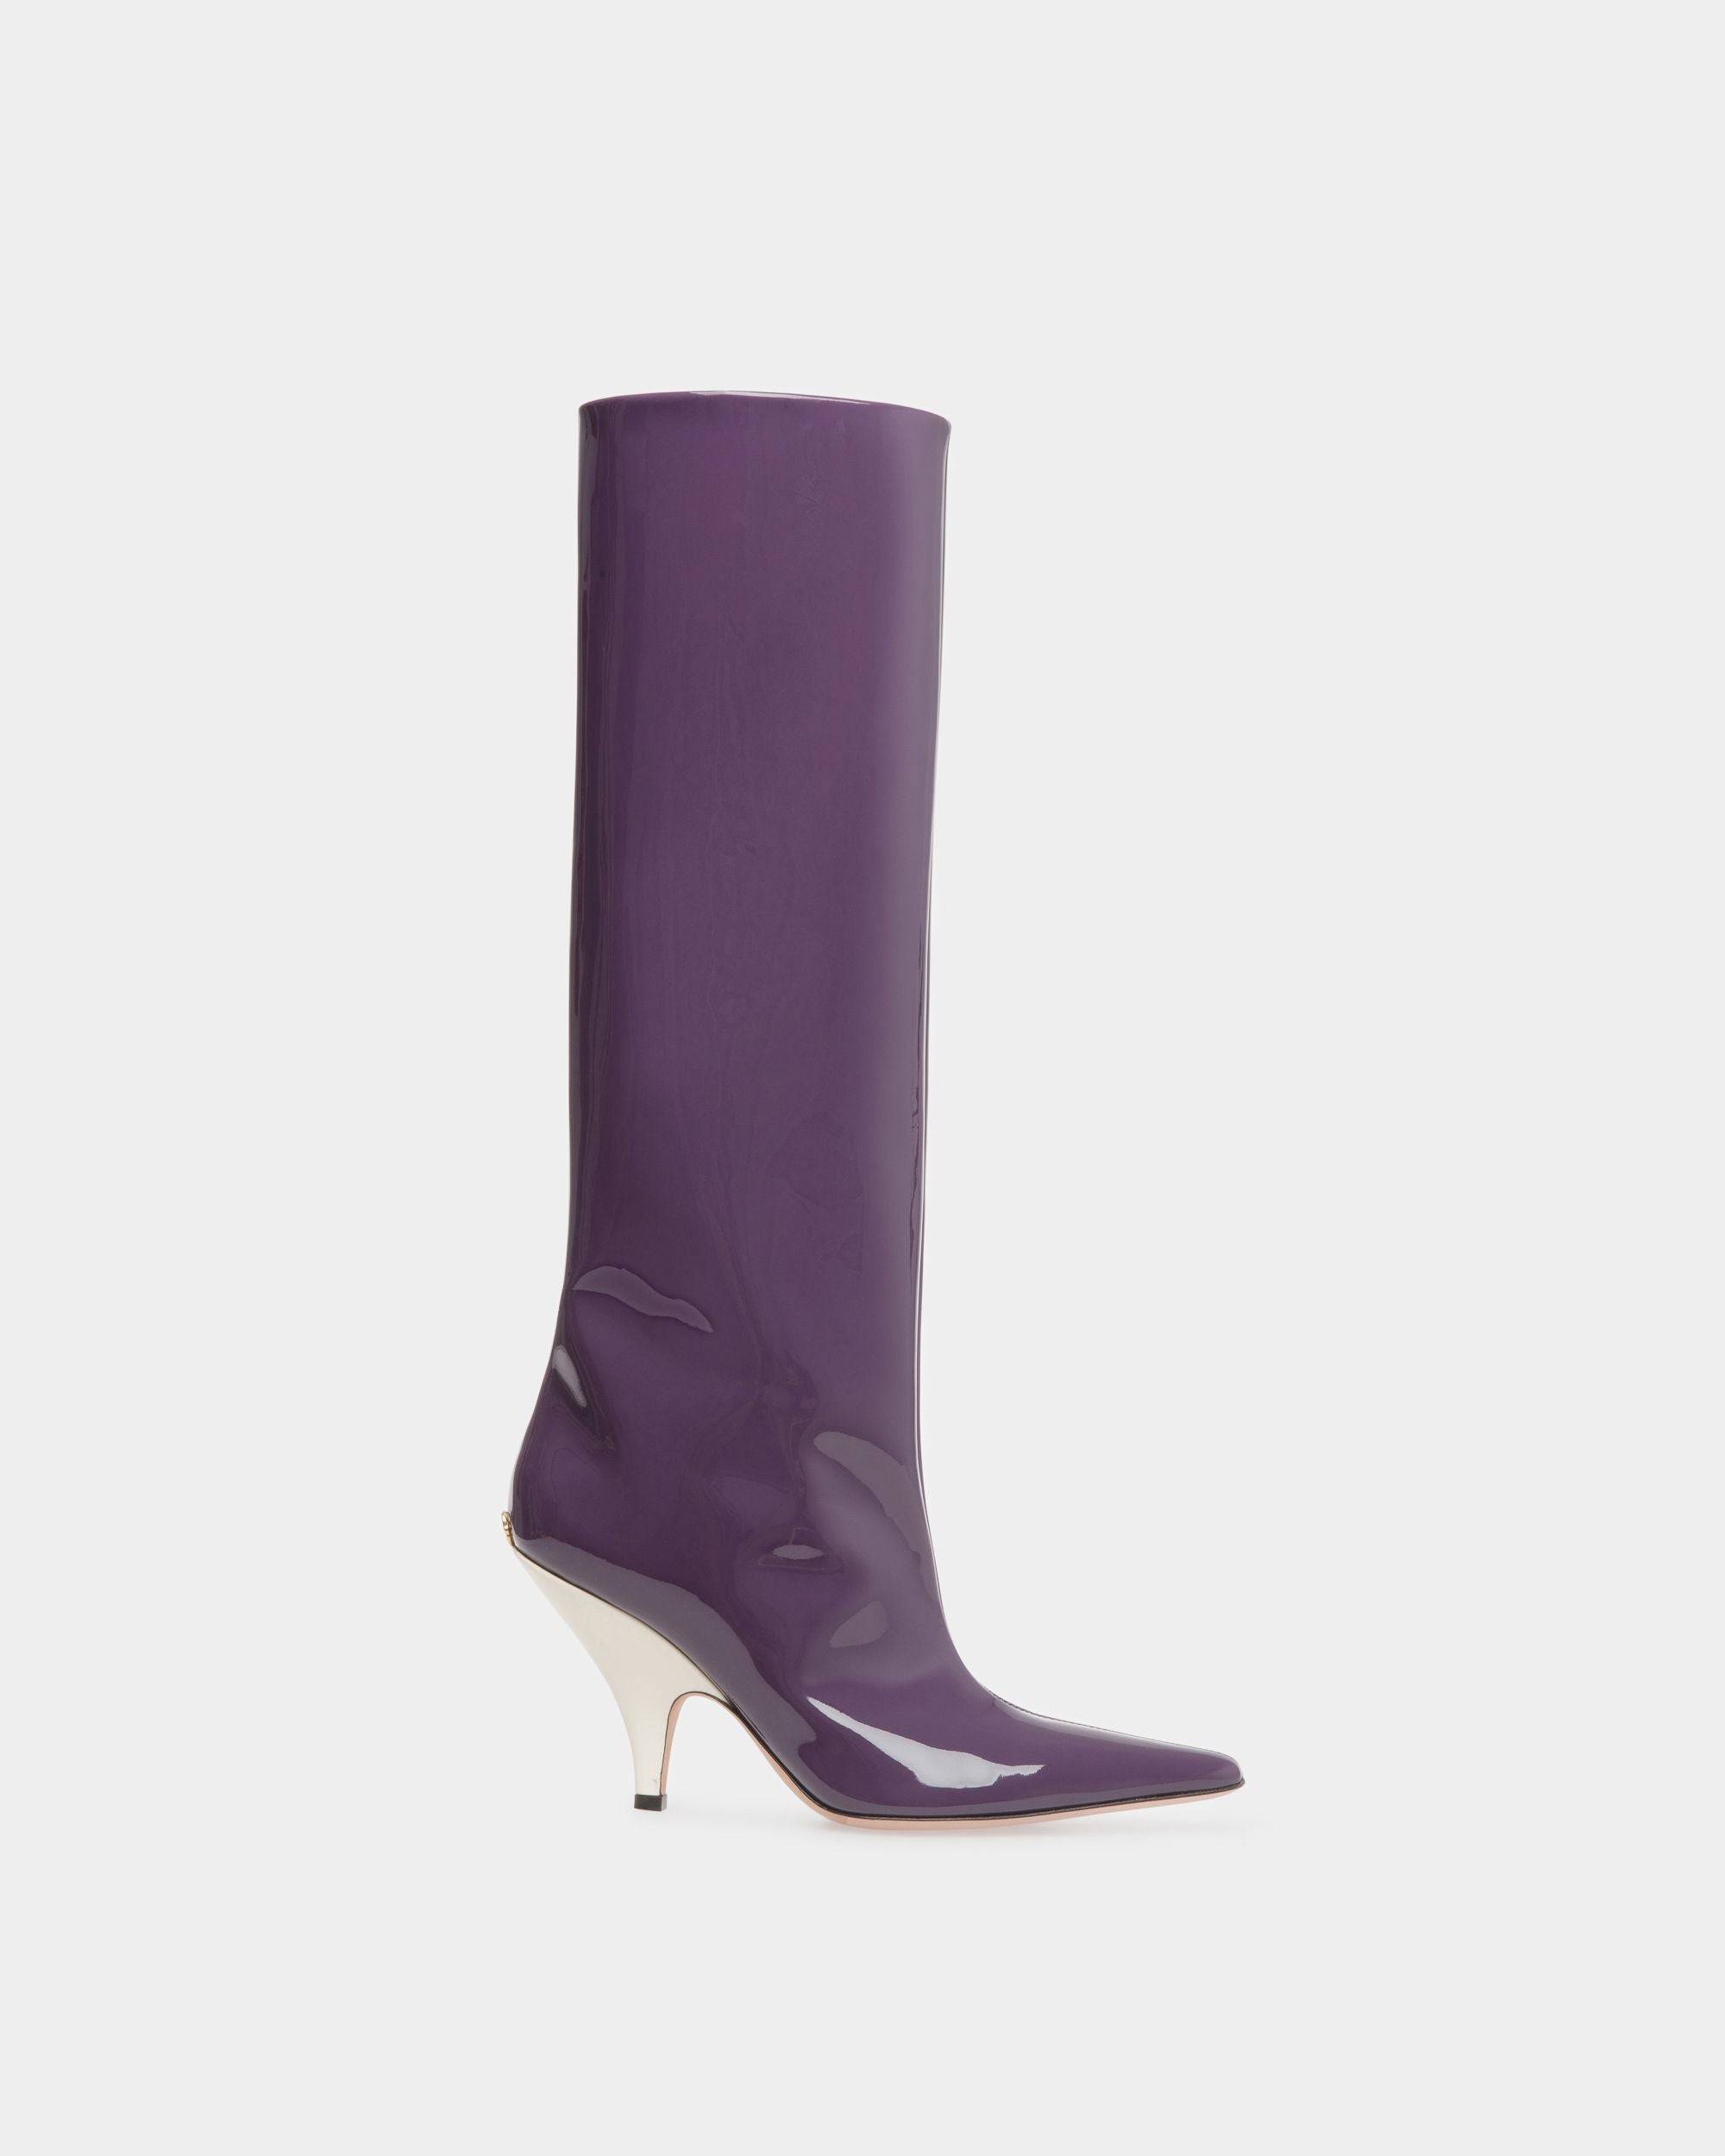 Women's Katy Long Boots In Orchid Leather | Bally | Still Life Side